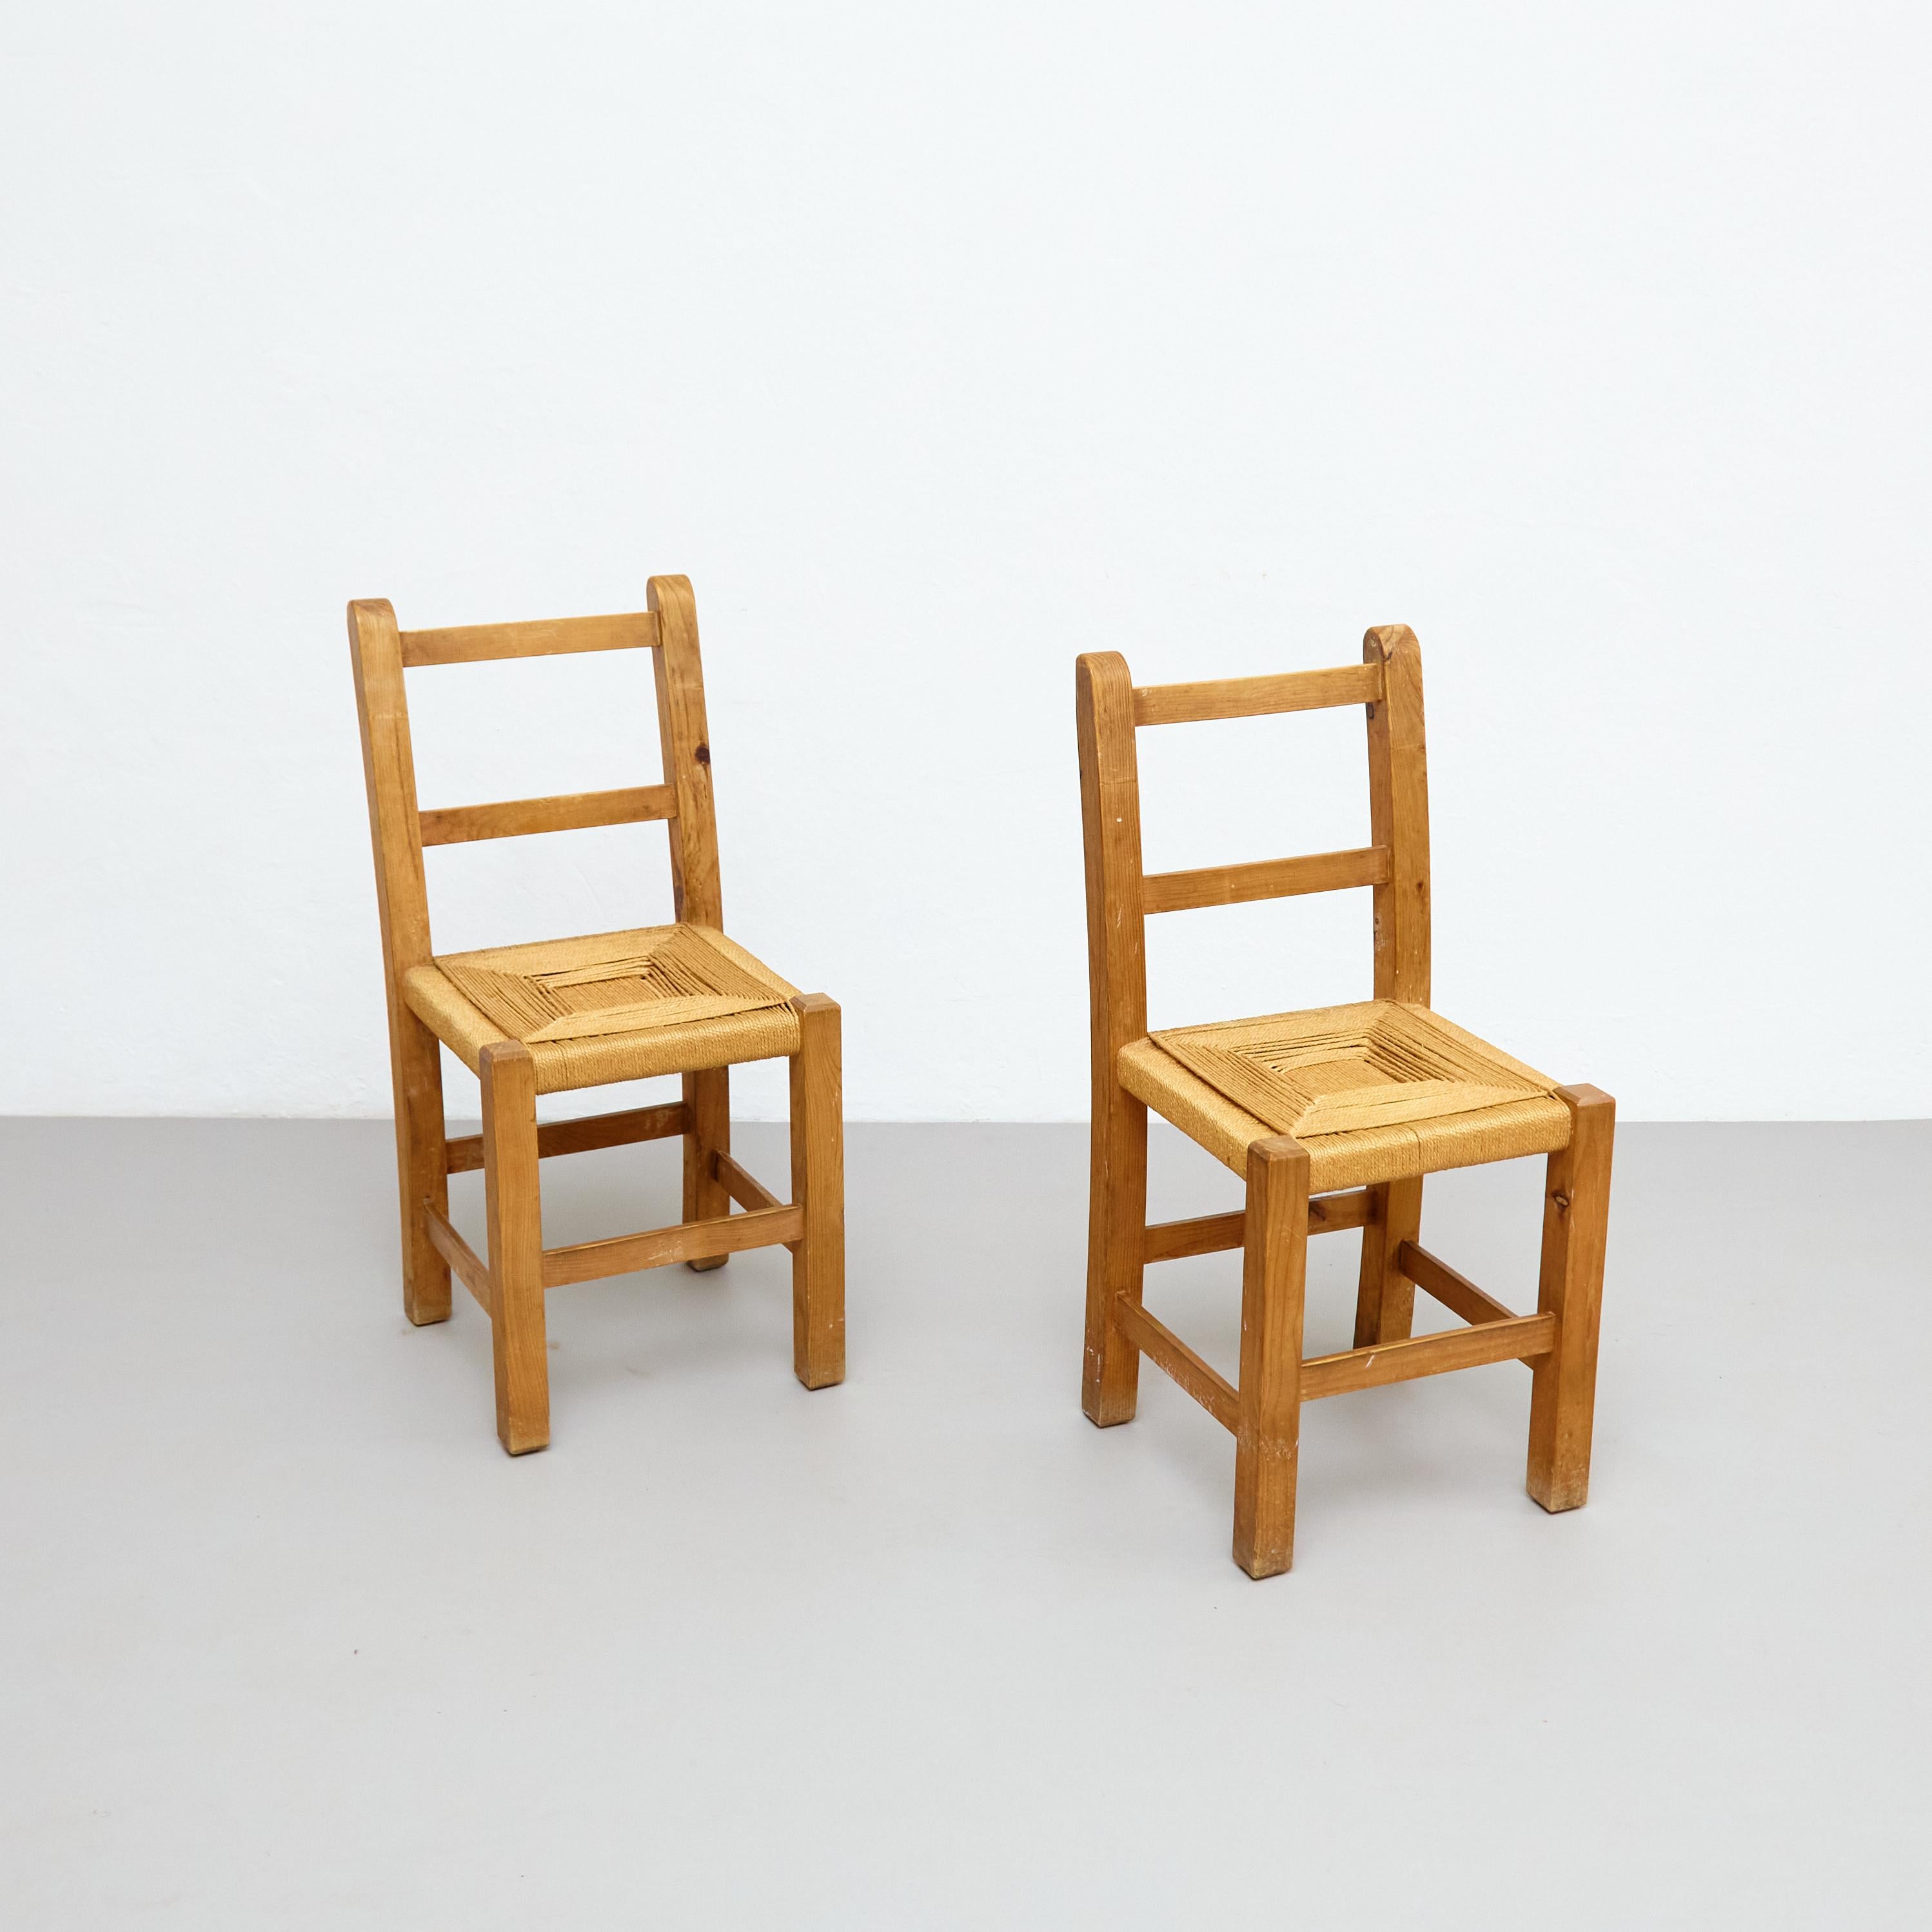 Mid-20th Century Pair of Mid-Century Modern Wood and Rattan French Rationalist Chairs, circa 1950 For Sale